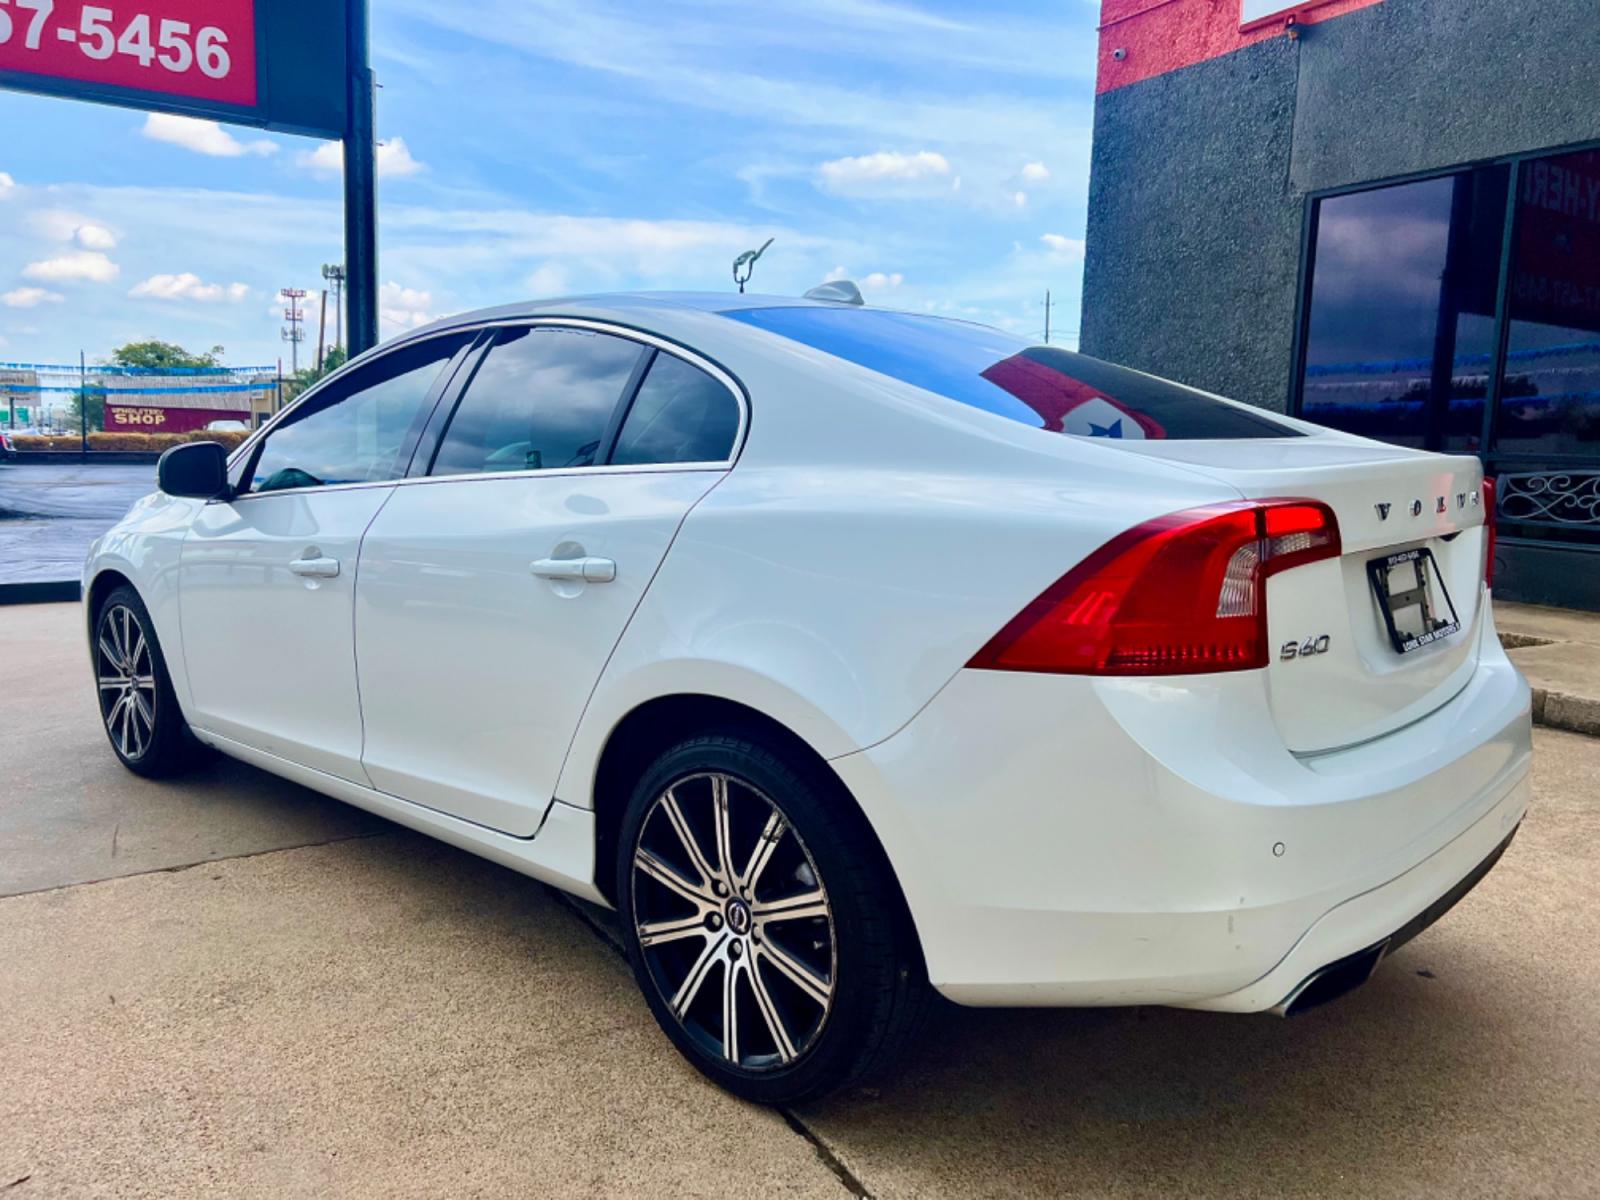 2014 WHITE VOLVO S60 T5 (YV1612FS1E2) , located at 5900 E. Lancaster Ave., Fort Worth, TX, 76112, (817) 457-5456, 0.000000, 0.000000 - This is a 2014 VOLVO S60 T5 4 DOOR SEDAN that is in excellent condition. There are no dents or scratches. The interior is clean with no rips or tears or stains. All power windows, door locks and seats. Ice cold AC for those hot Texas summer days. It is equipped with a CD player, AM/FM radio, AUX por - Photo #4